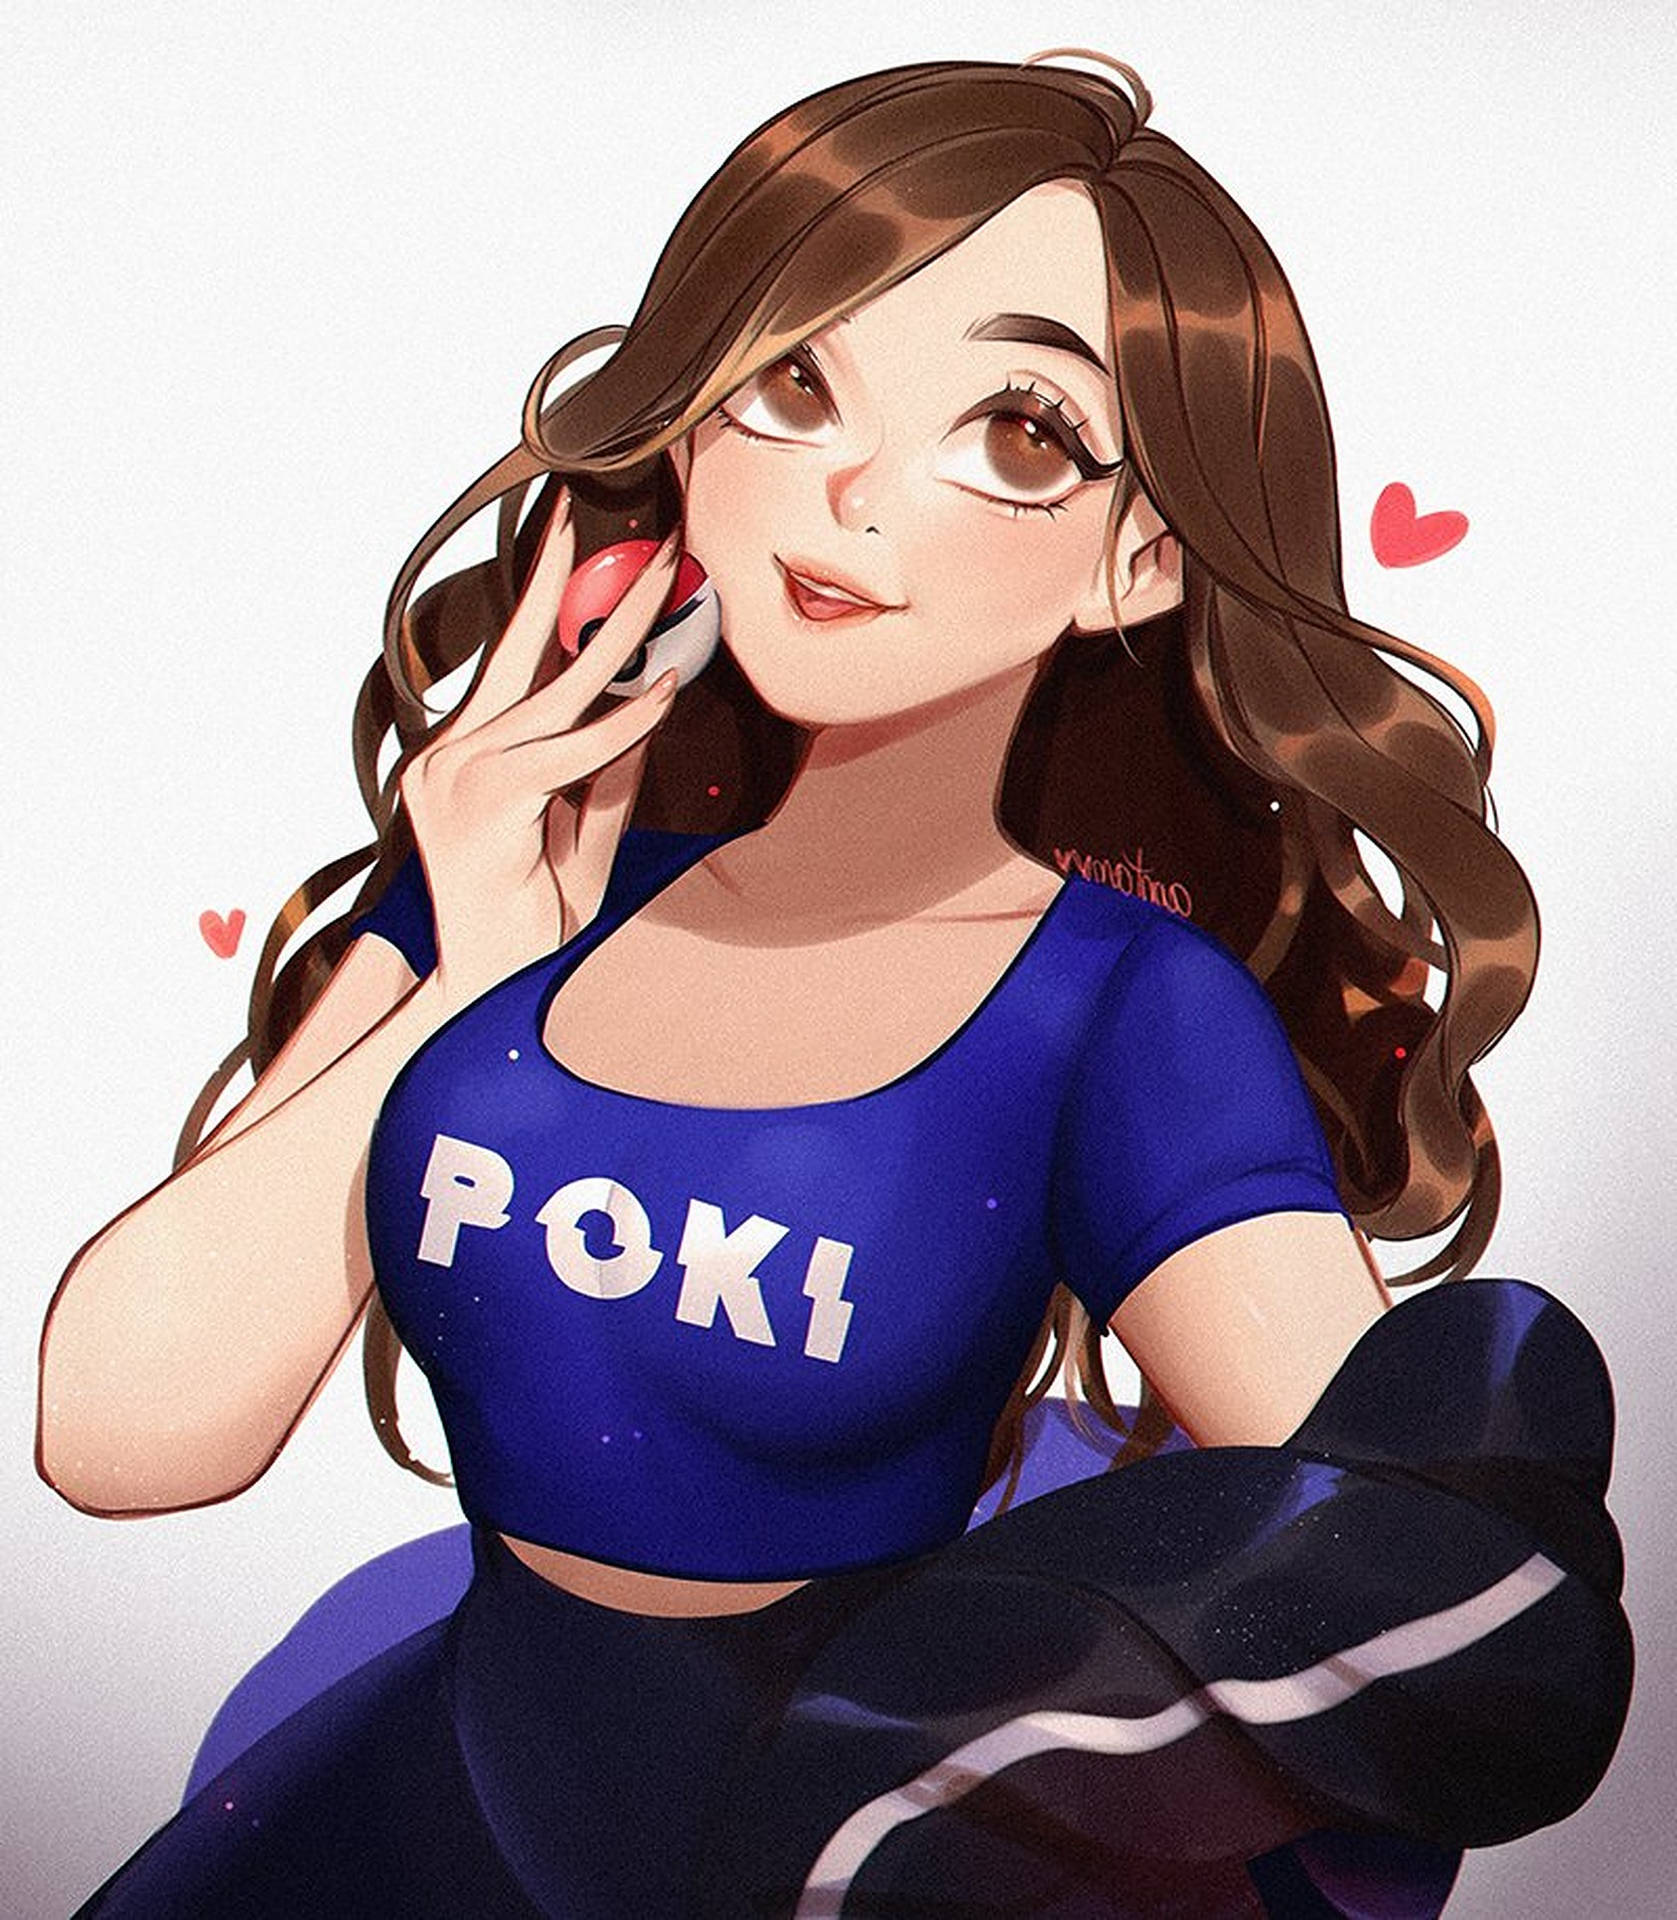 Exploring images in the style of selected image: [Poki!] | PixAI